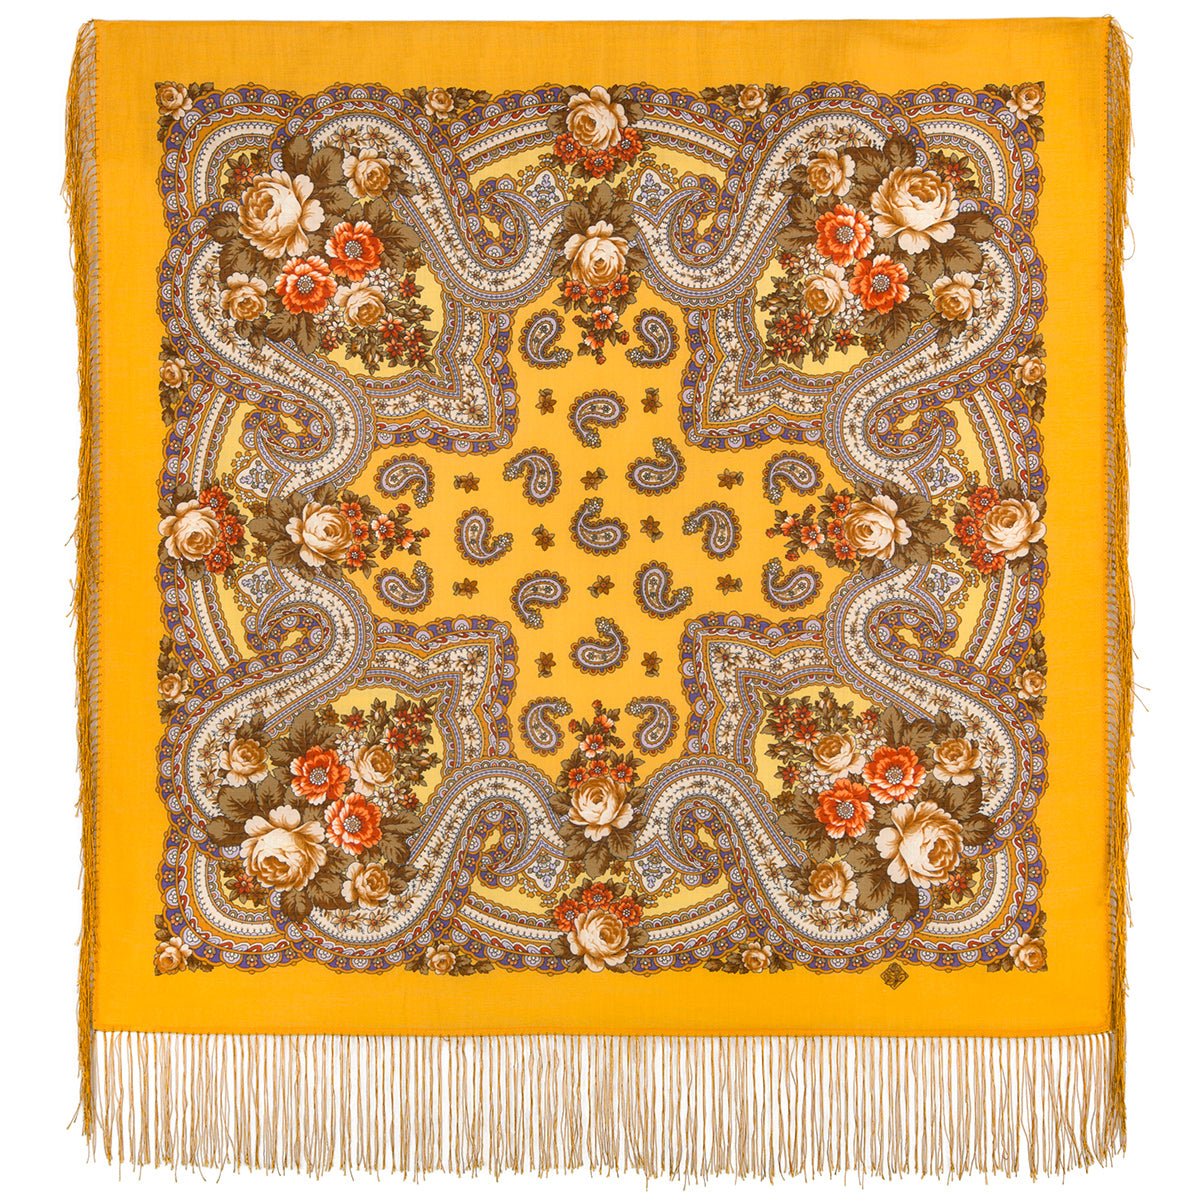 Kerchief "On The Wings of Memory"